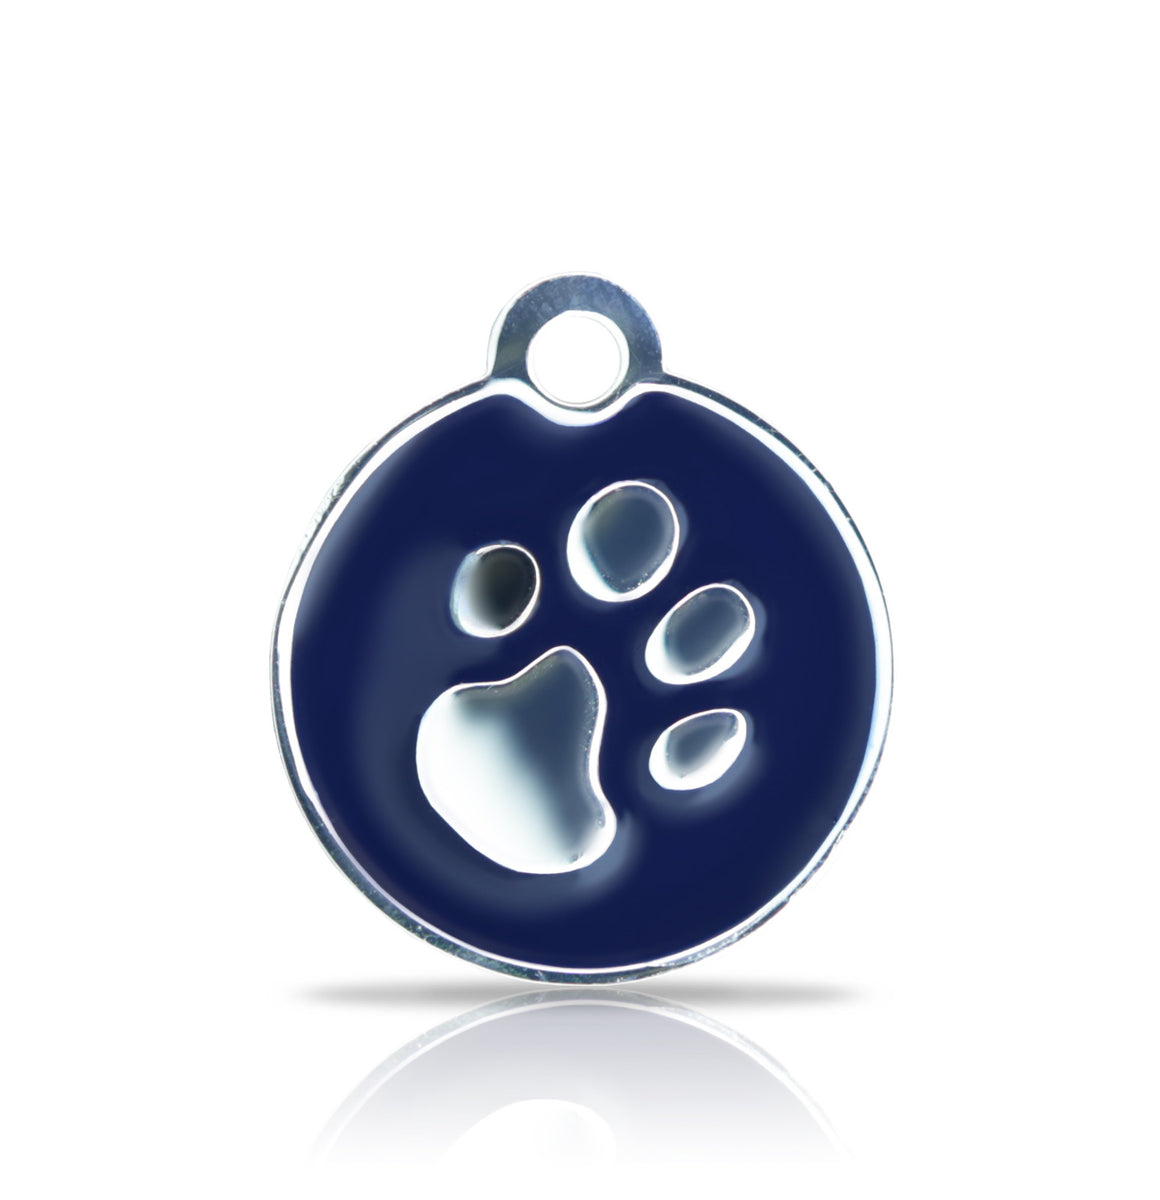 TaggIT Elegance Small Disc Blue & Silver iMarc Pet Tag